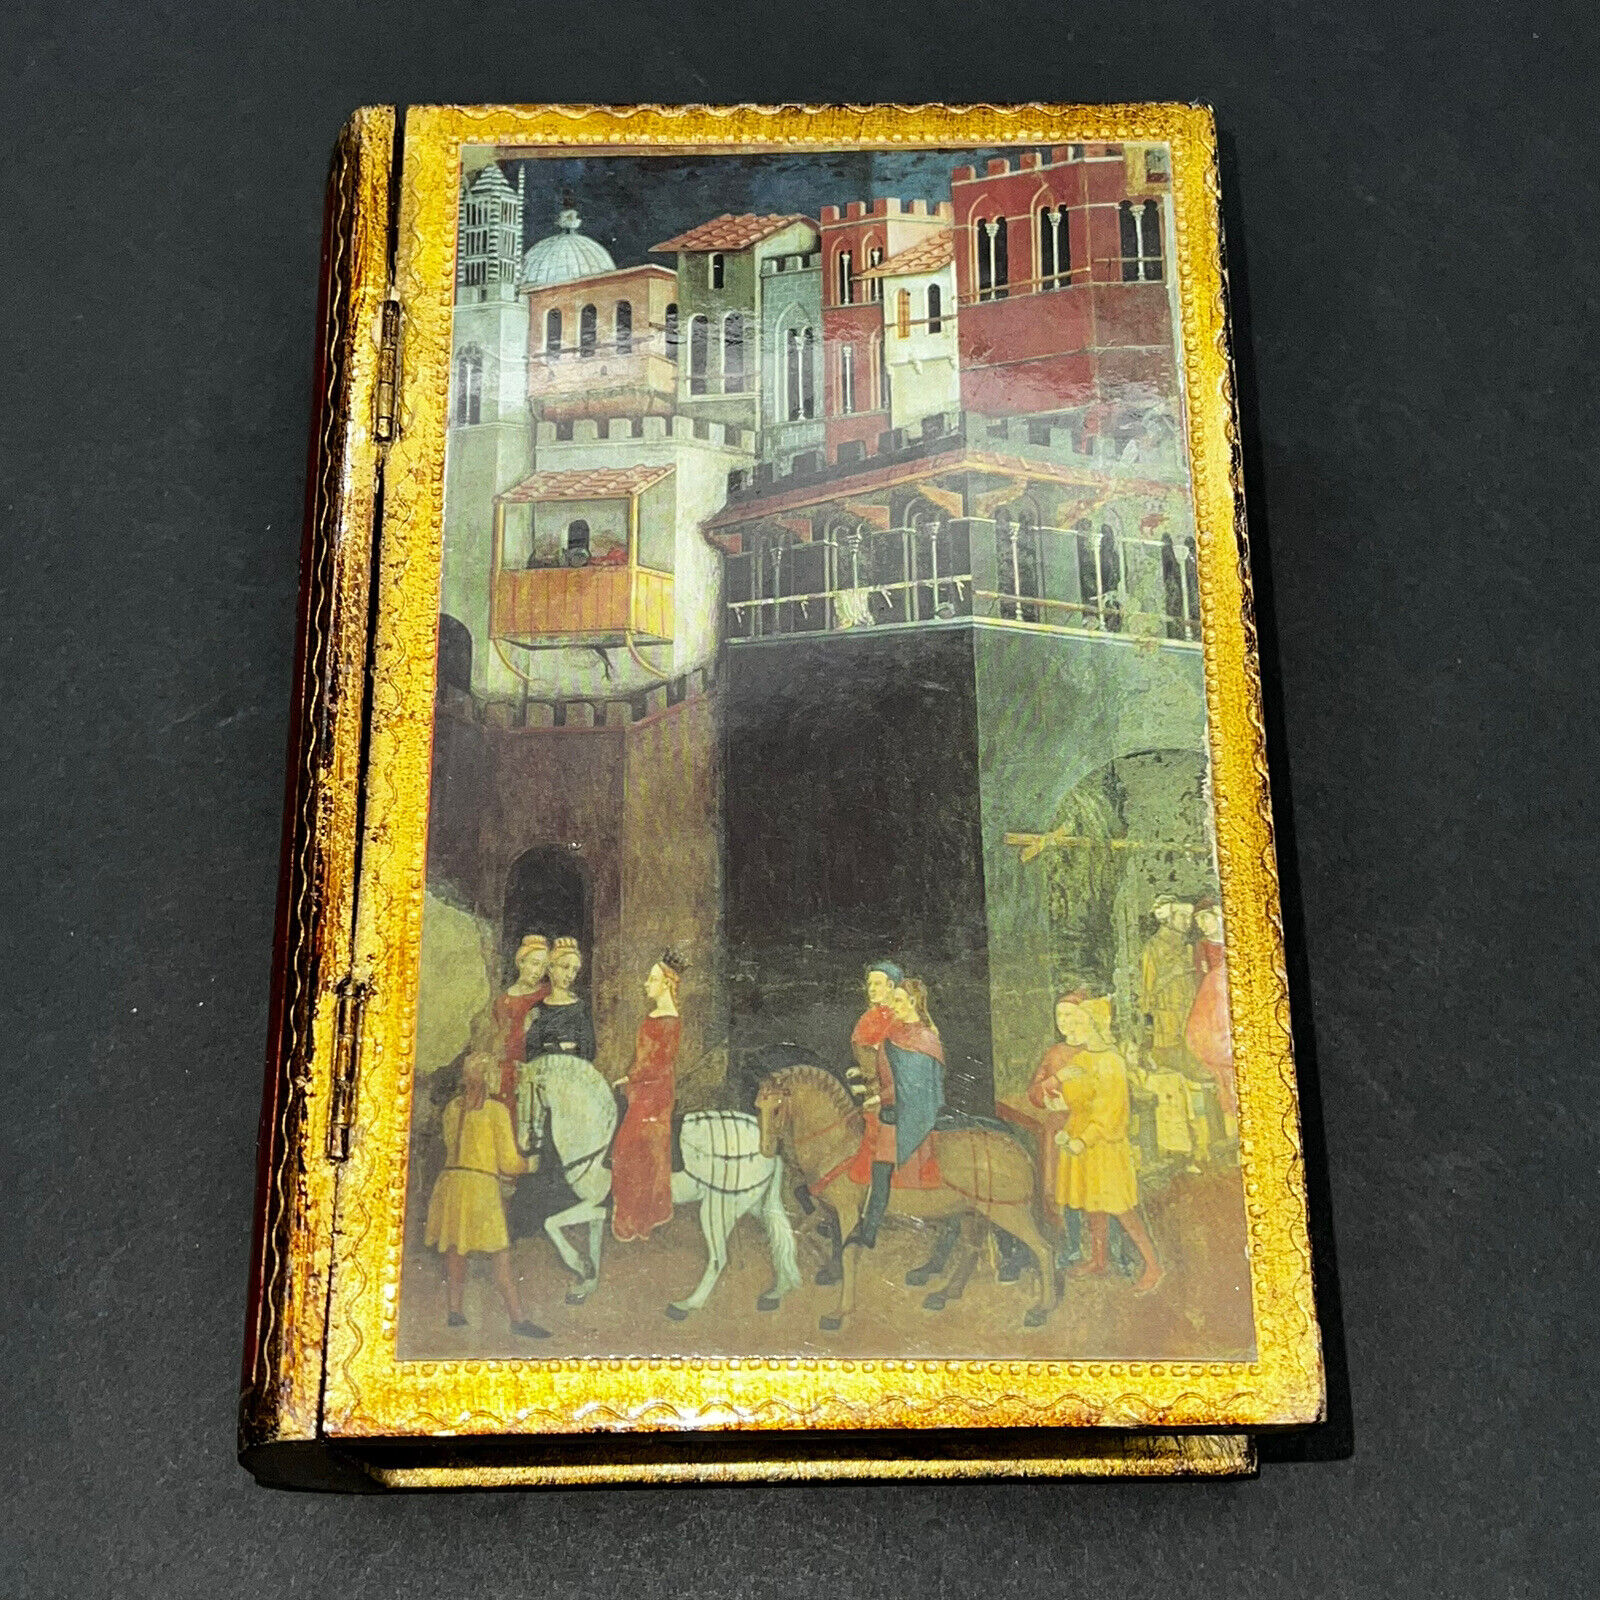 Vintage Fake Gilded Book Wooden Trinket Box Made in Italy 7 x 4.5 x 2.25